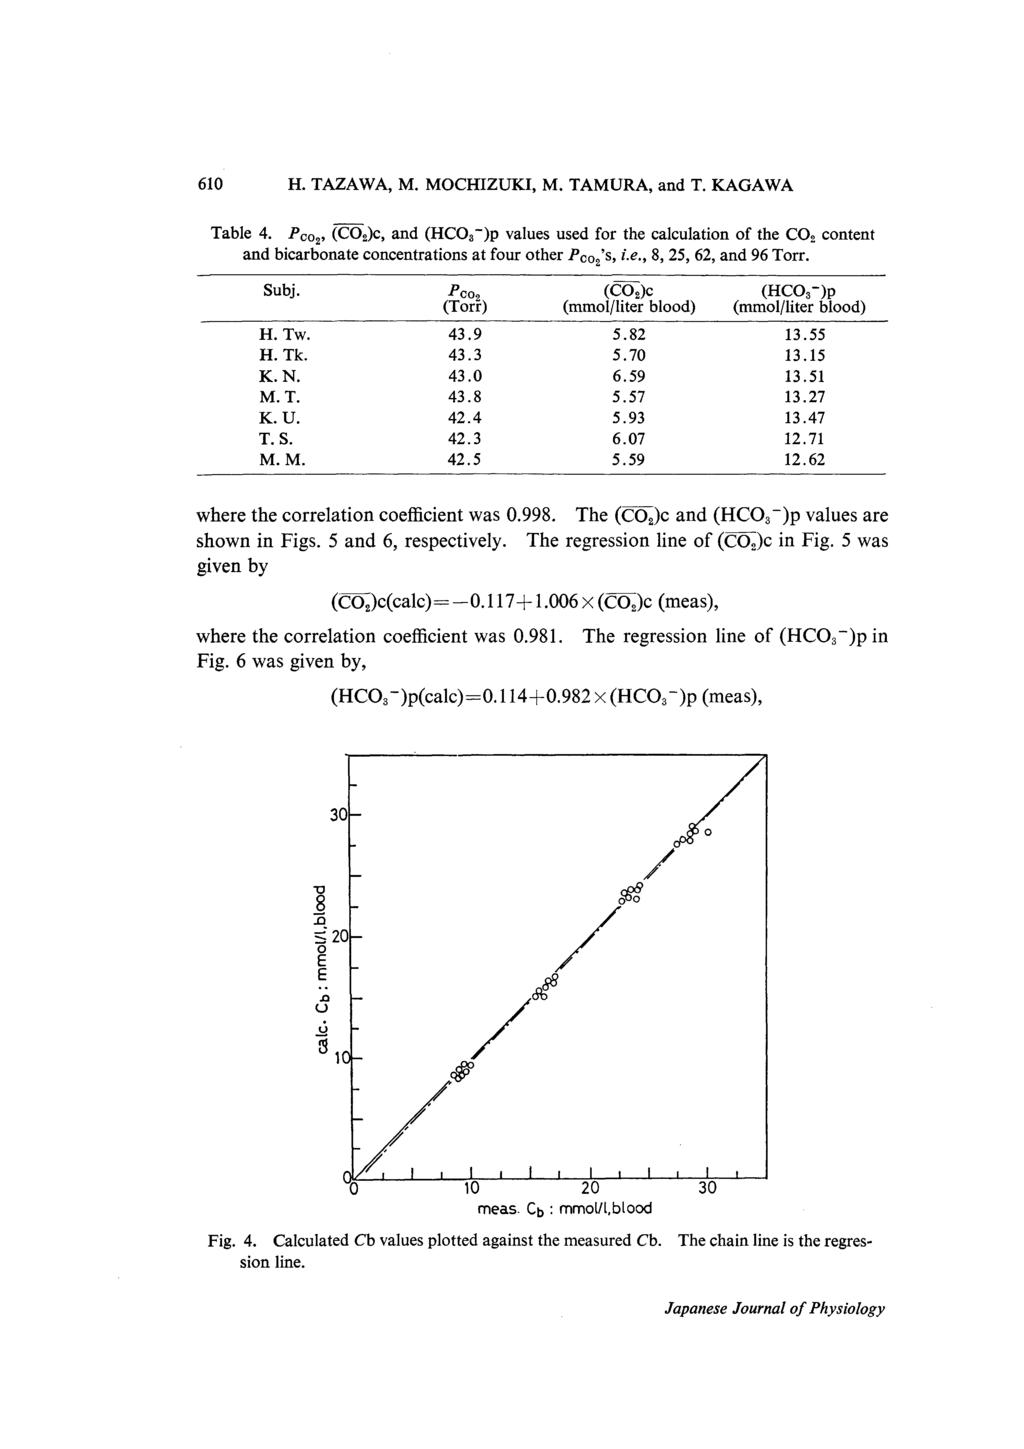 610 H. TAZAWA, M. MOCHIZUKI, M. TAMURA, and T. KAGAWA Table 4. PC02, (C02)c, and (HC03)p values used for the calculation of the CO2 content and bicarbonate concentrations at four other PCo2's, i.e., 8, 25, 62, and 96 Torr.